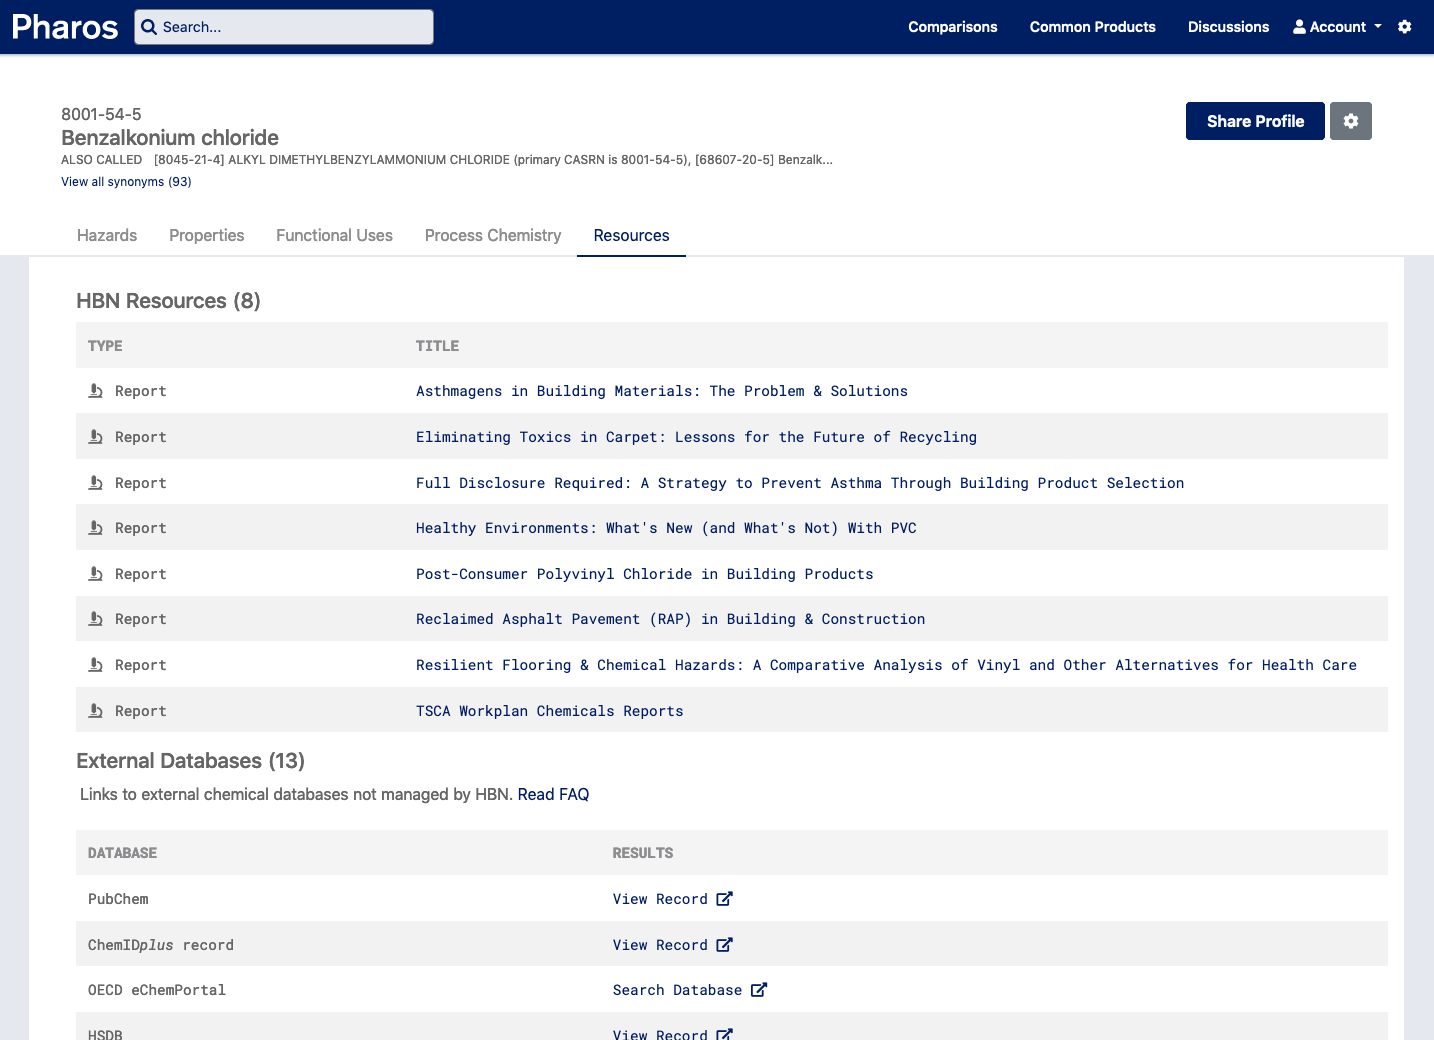 Preview screenshot of the Resources tab of a chemical profiles, showing a list of related reports developed by Healthy Building Network as well as links to external databases.